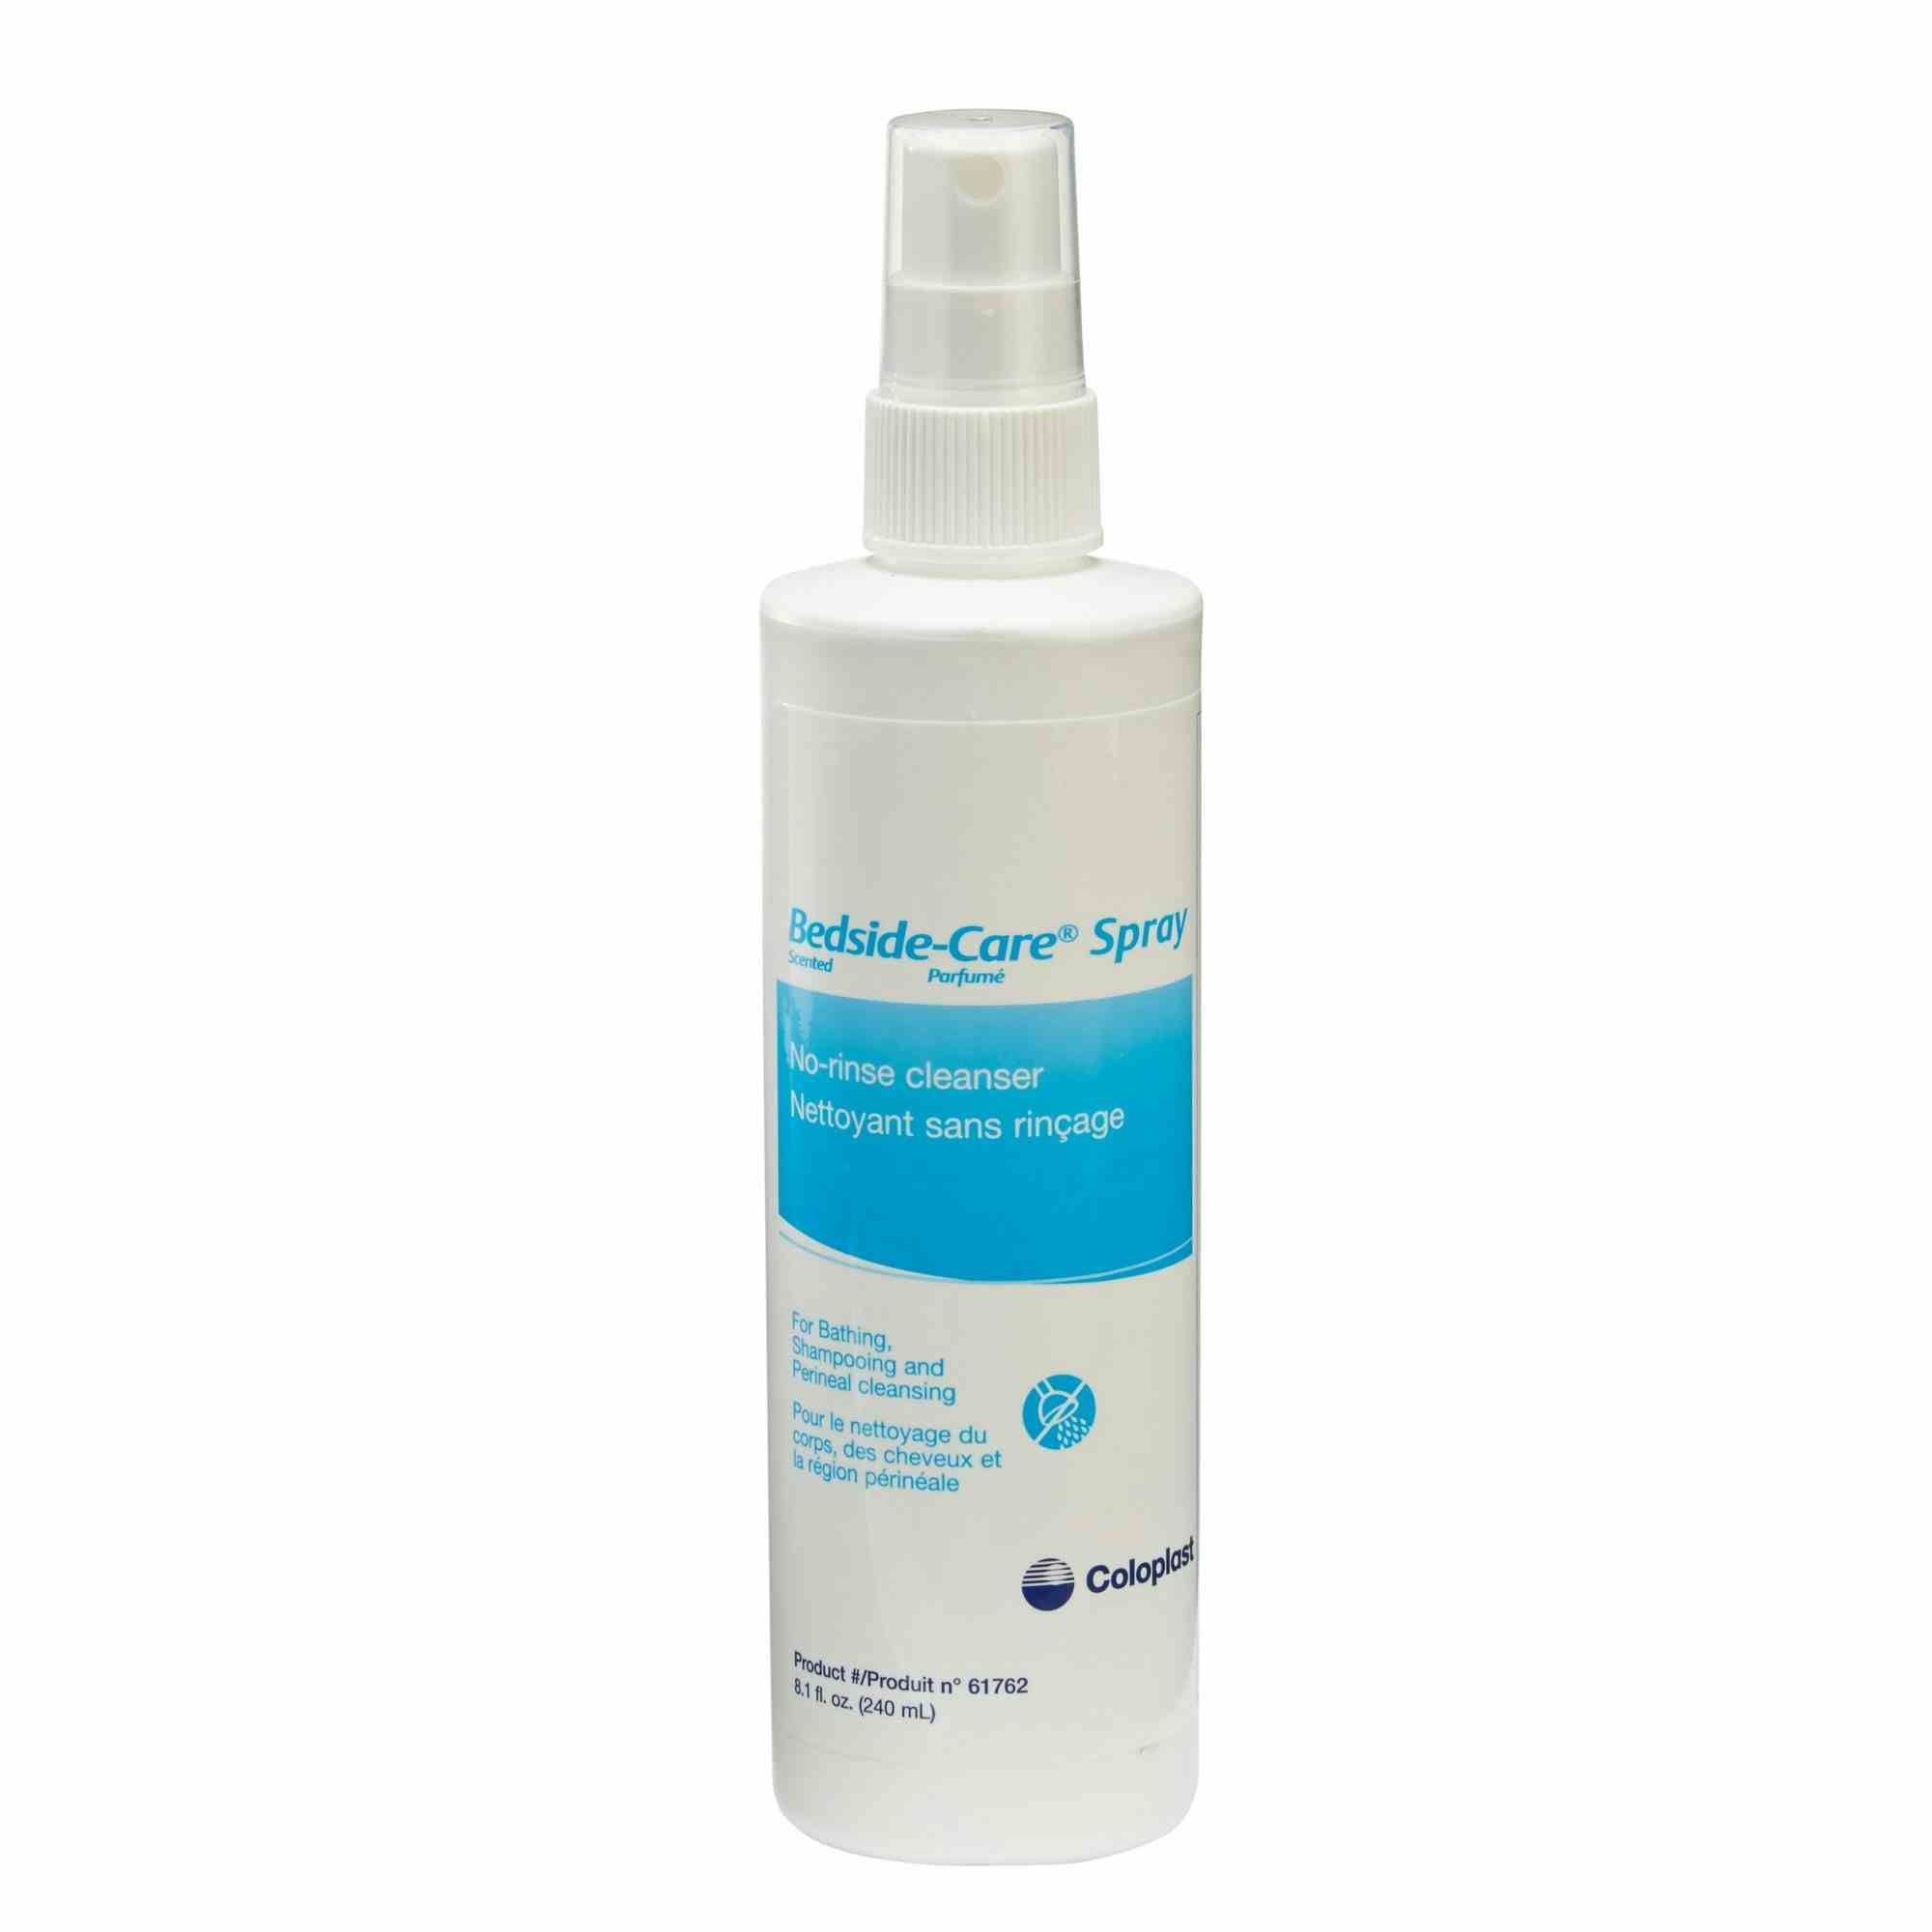 Coloplast Bedside-Care No-Rinse Cleanser, 8.1 oz, 61762, 1 Each